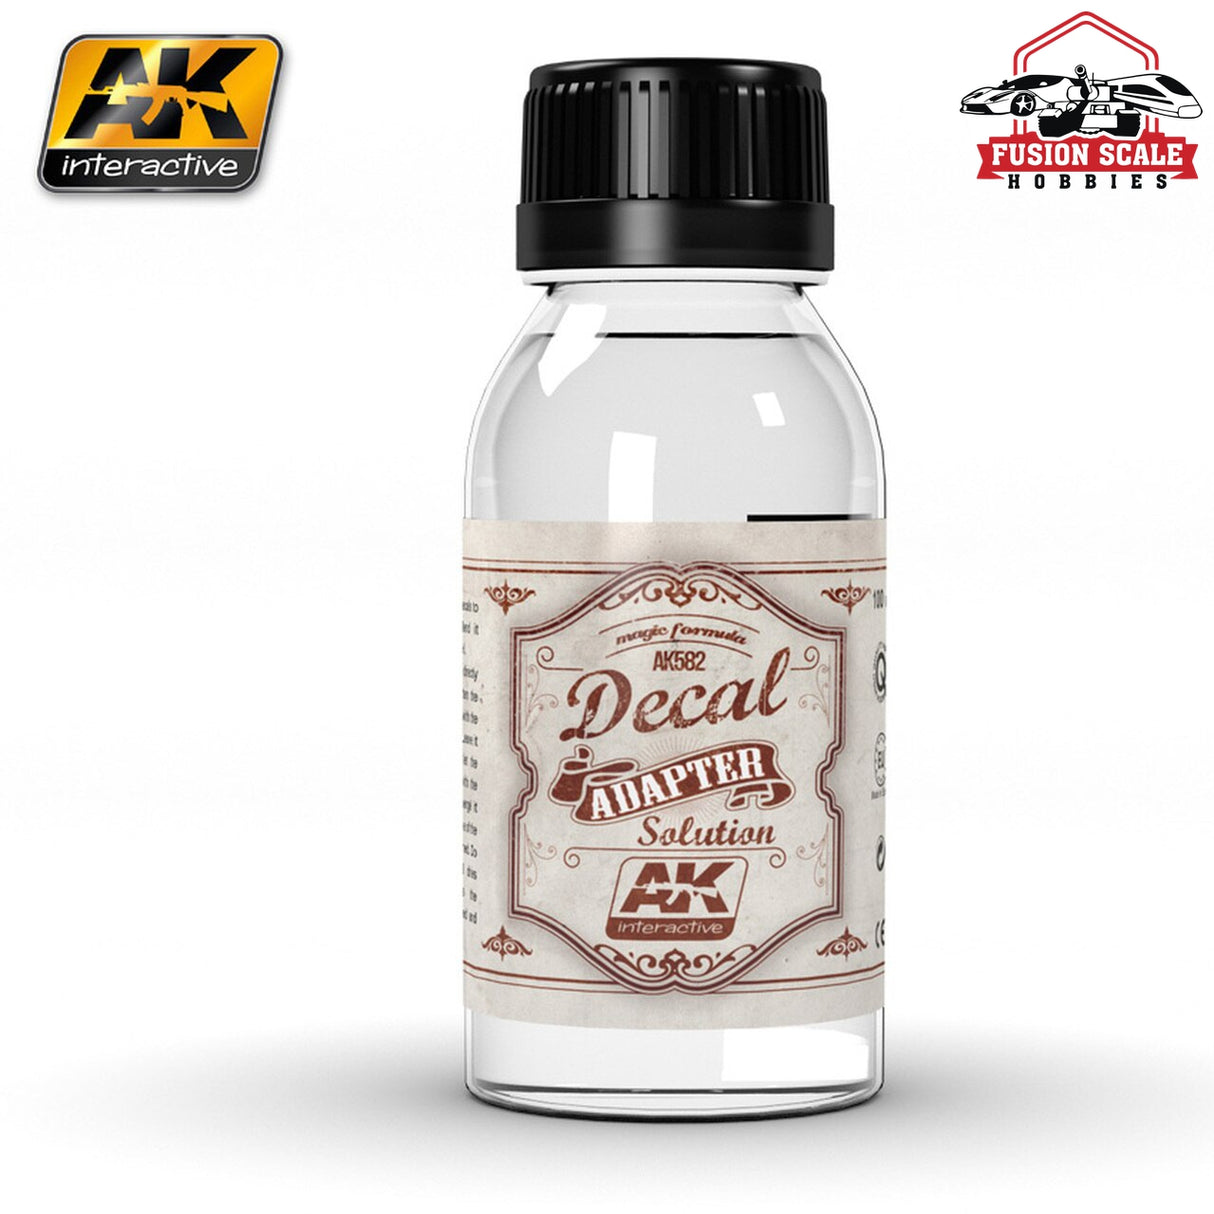 AK Interactive Decal Adapter Solution 100ml Bottle - Fusion Scale Hobbies